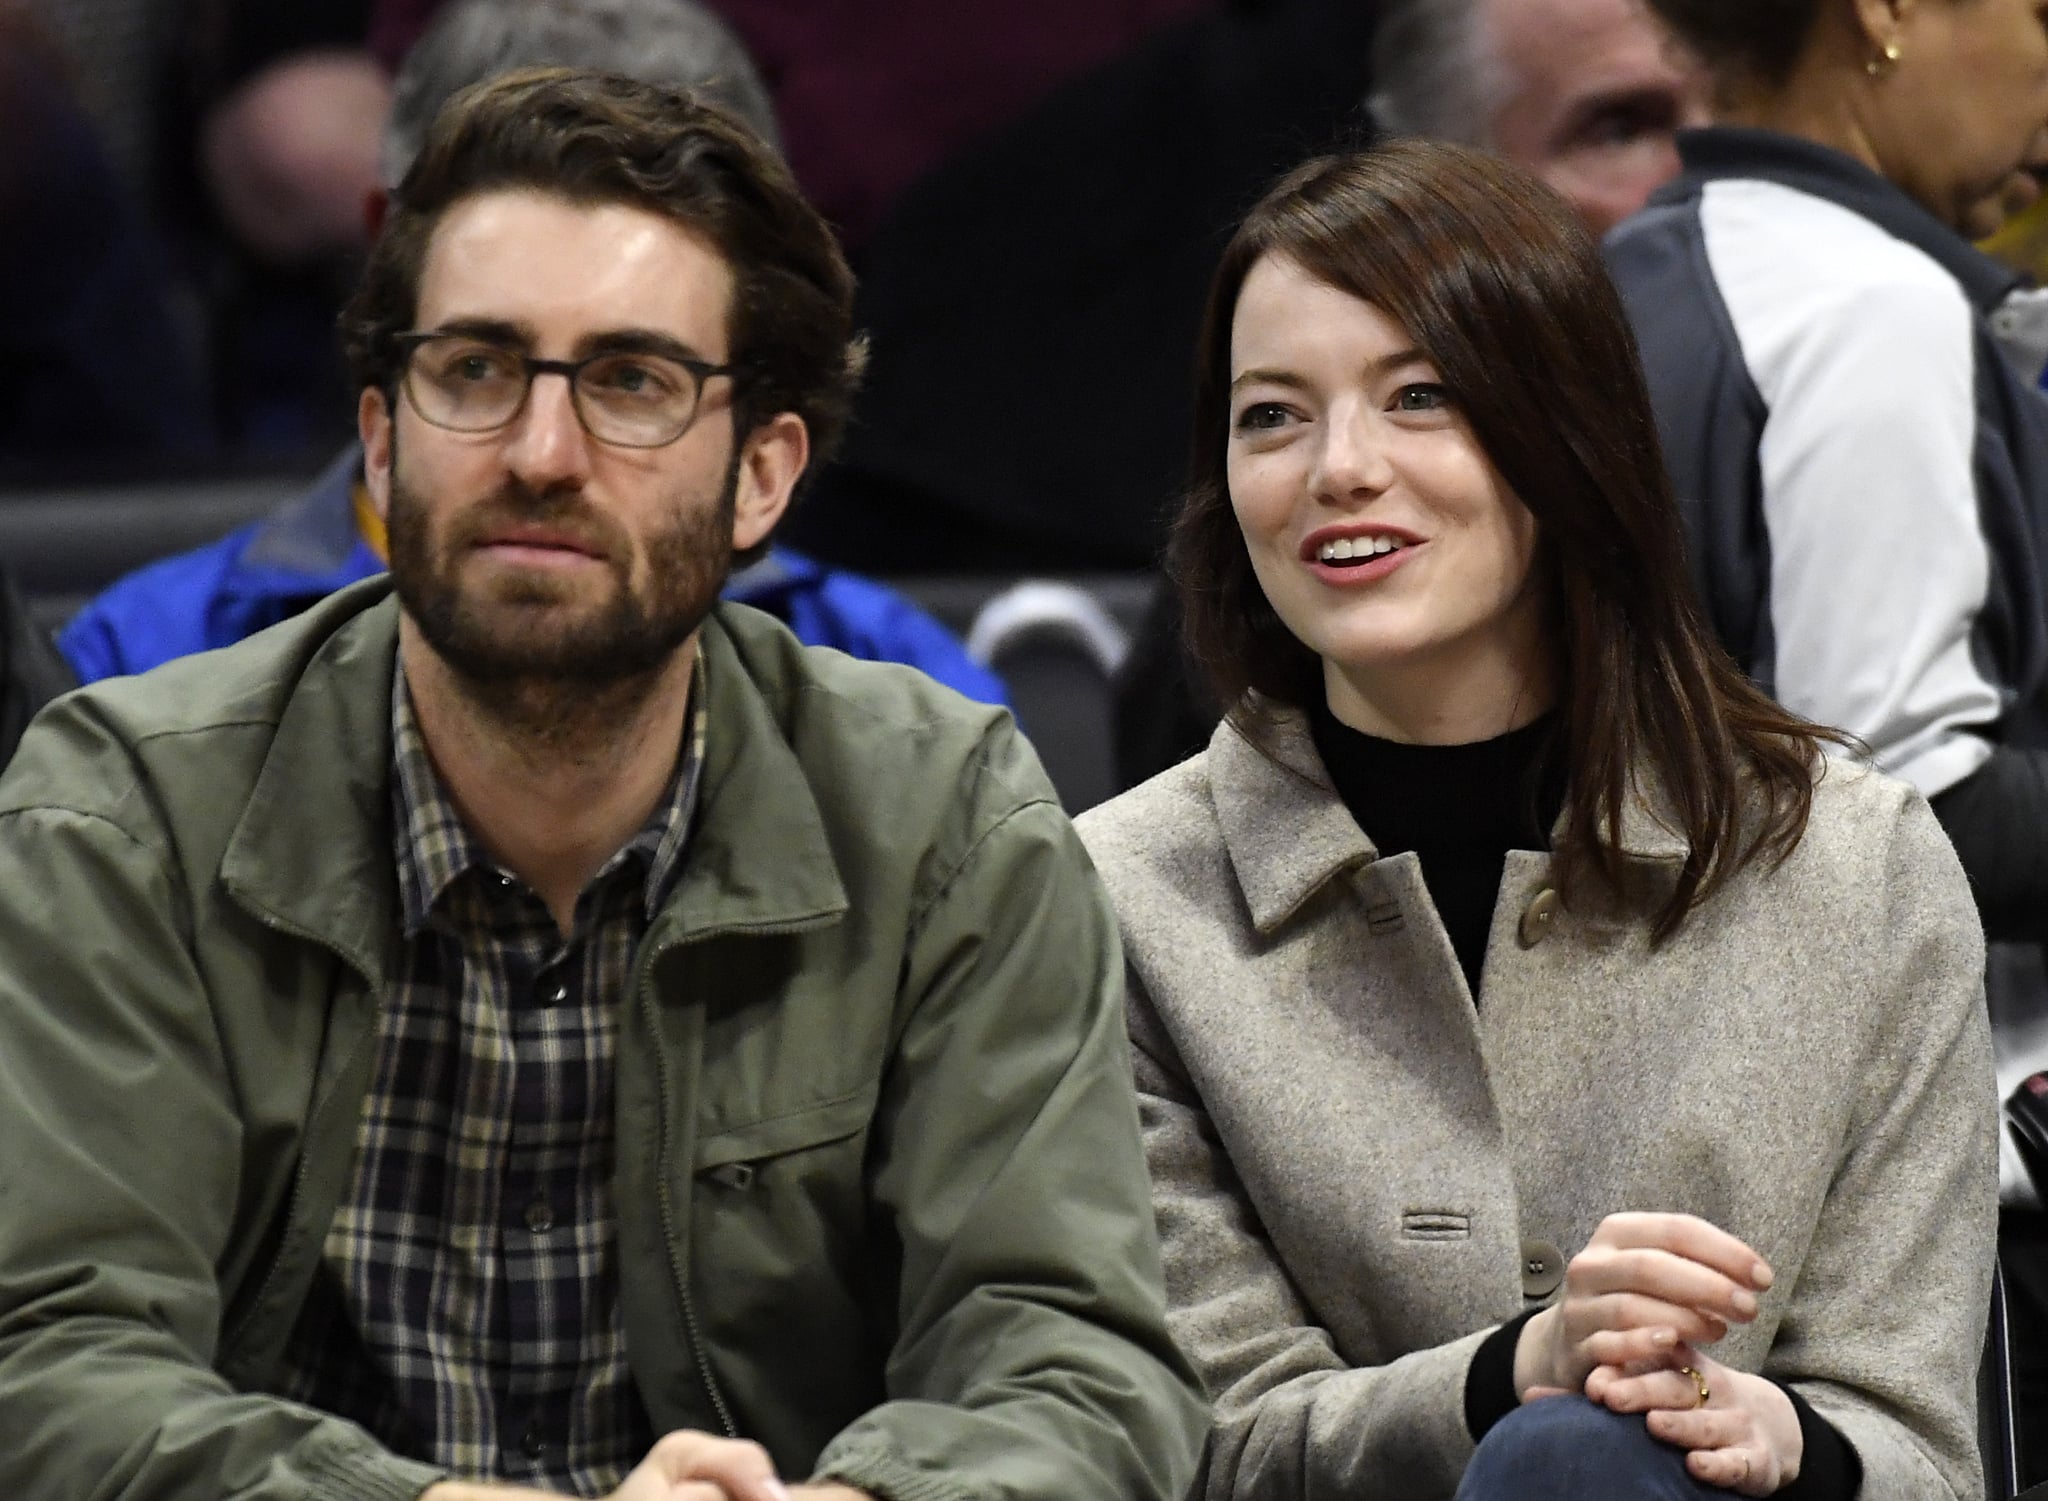 LOS ANGELES, CA - JANUARY 18: Emma Stone and Dave McCary attend the Golden State Warriors and Los Angeles Clippers basketball game at Staples Centre on January 18, 2019 in Los Angeles, California. NOTE TO USER: User expressly acknowledges and agrees that, by downloading and or using this photograph, User is consenting to the terms and conditions of the Getty Images Licence Agreement. (Photo by Kevork Djansezian/Getty Images)